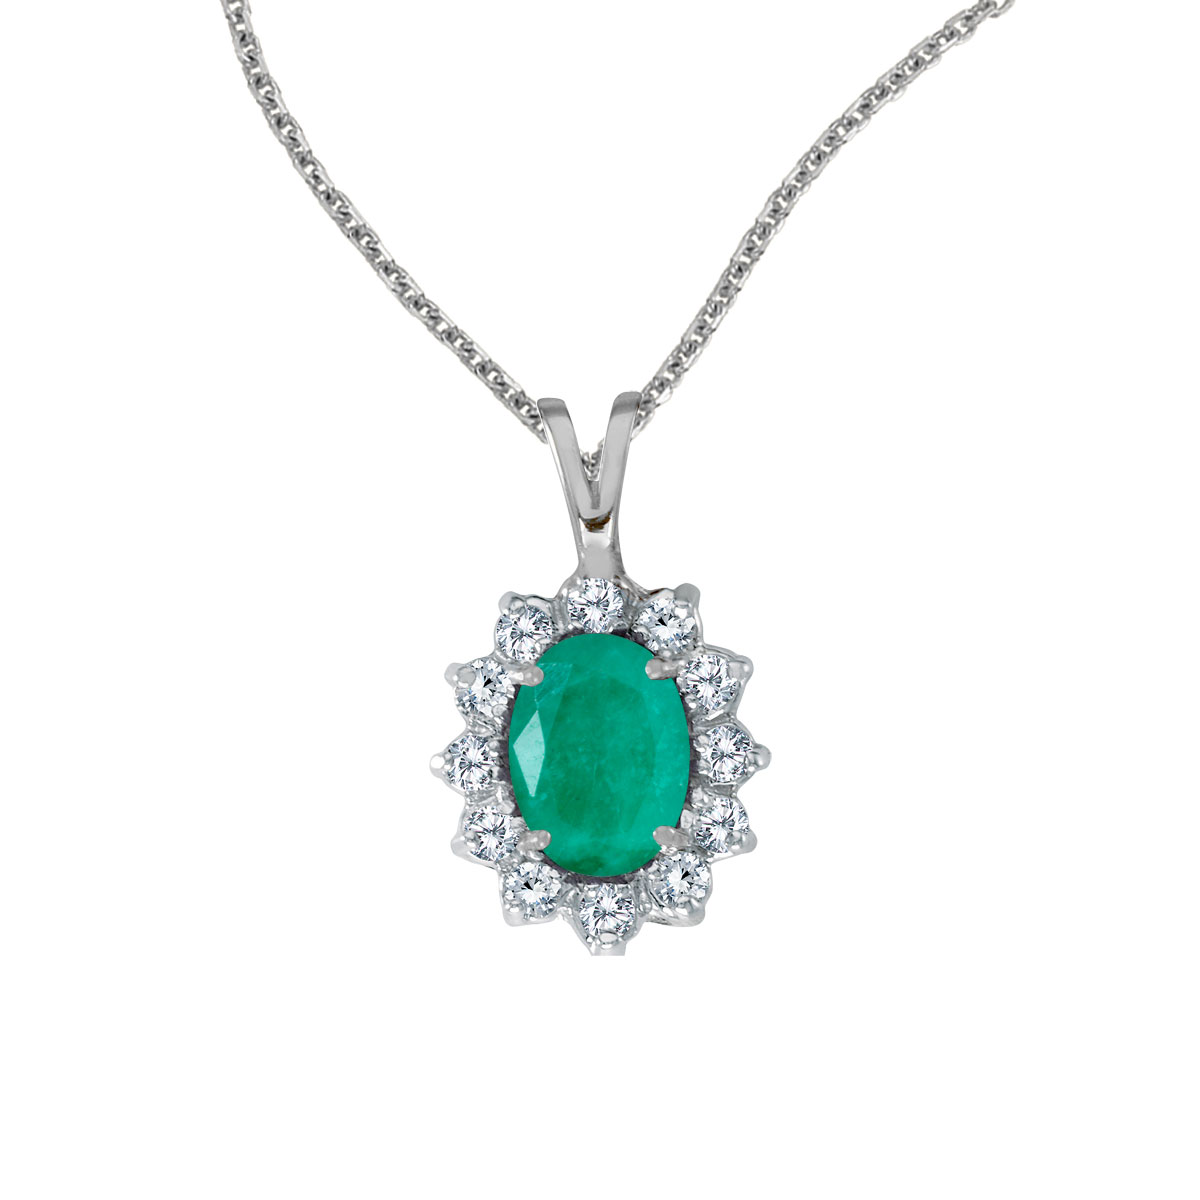 8x6 mm emerald surrounded by .30 carats of shimmering diamonds set in 14k white gold. Perfect for...